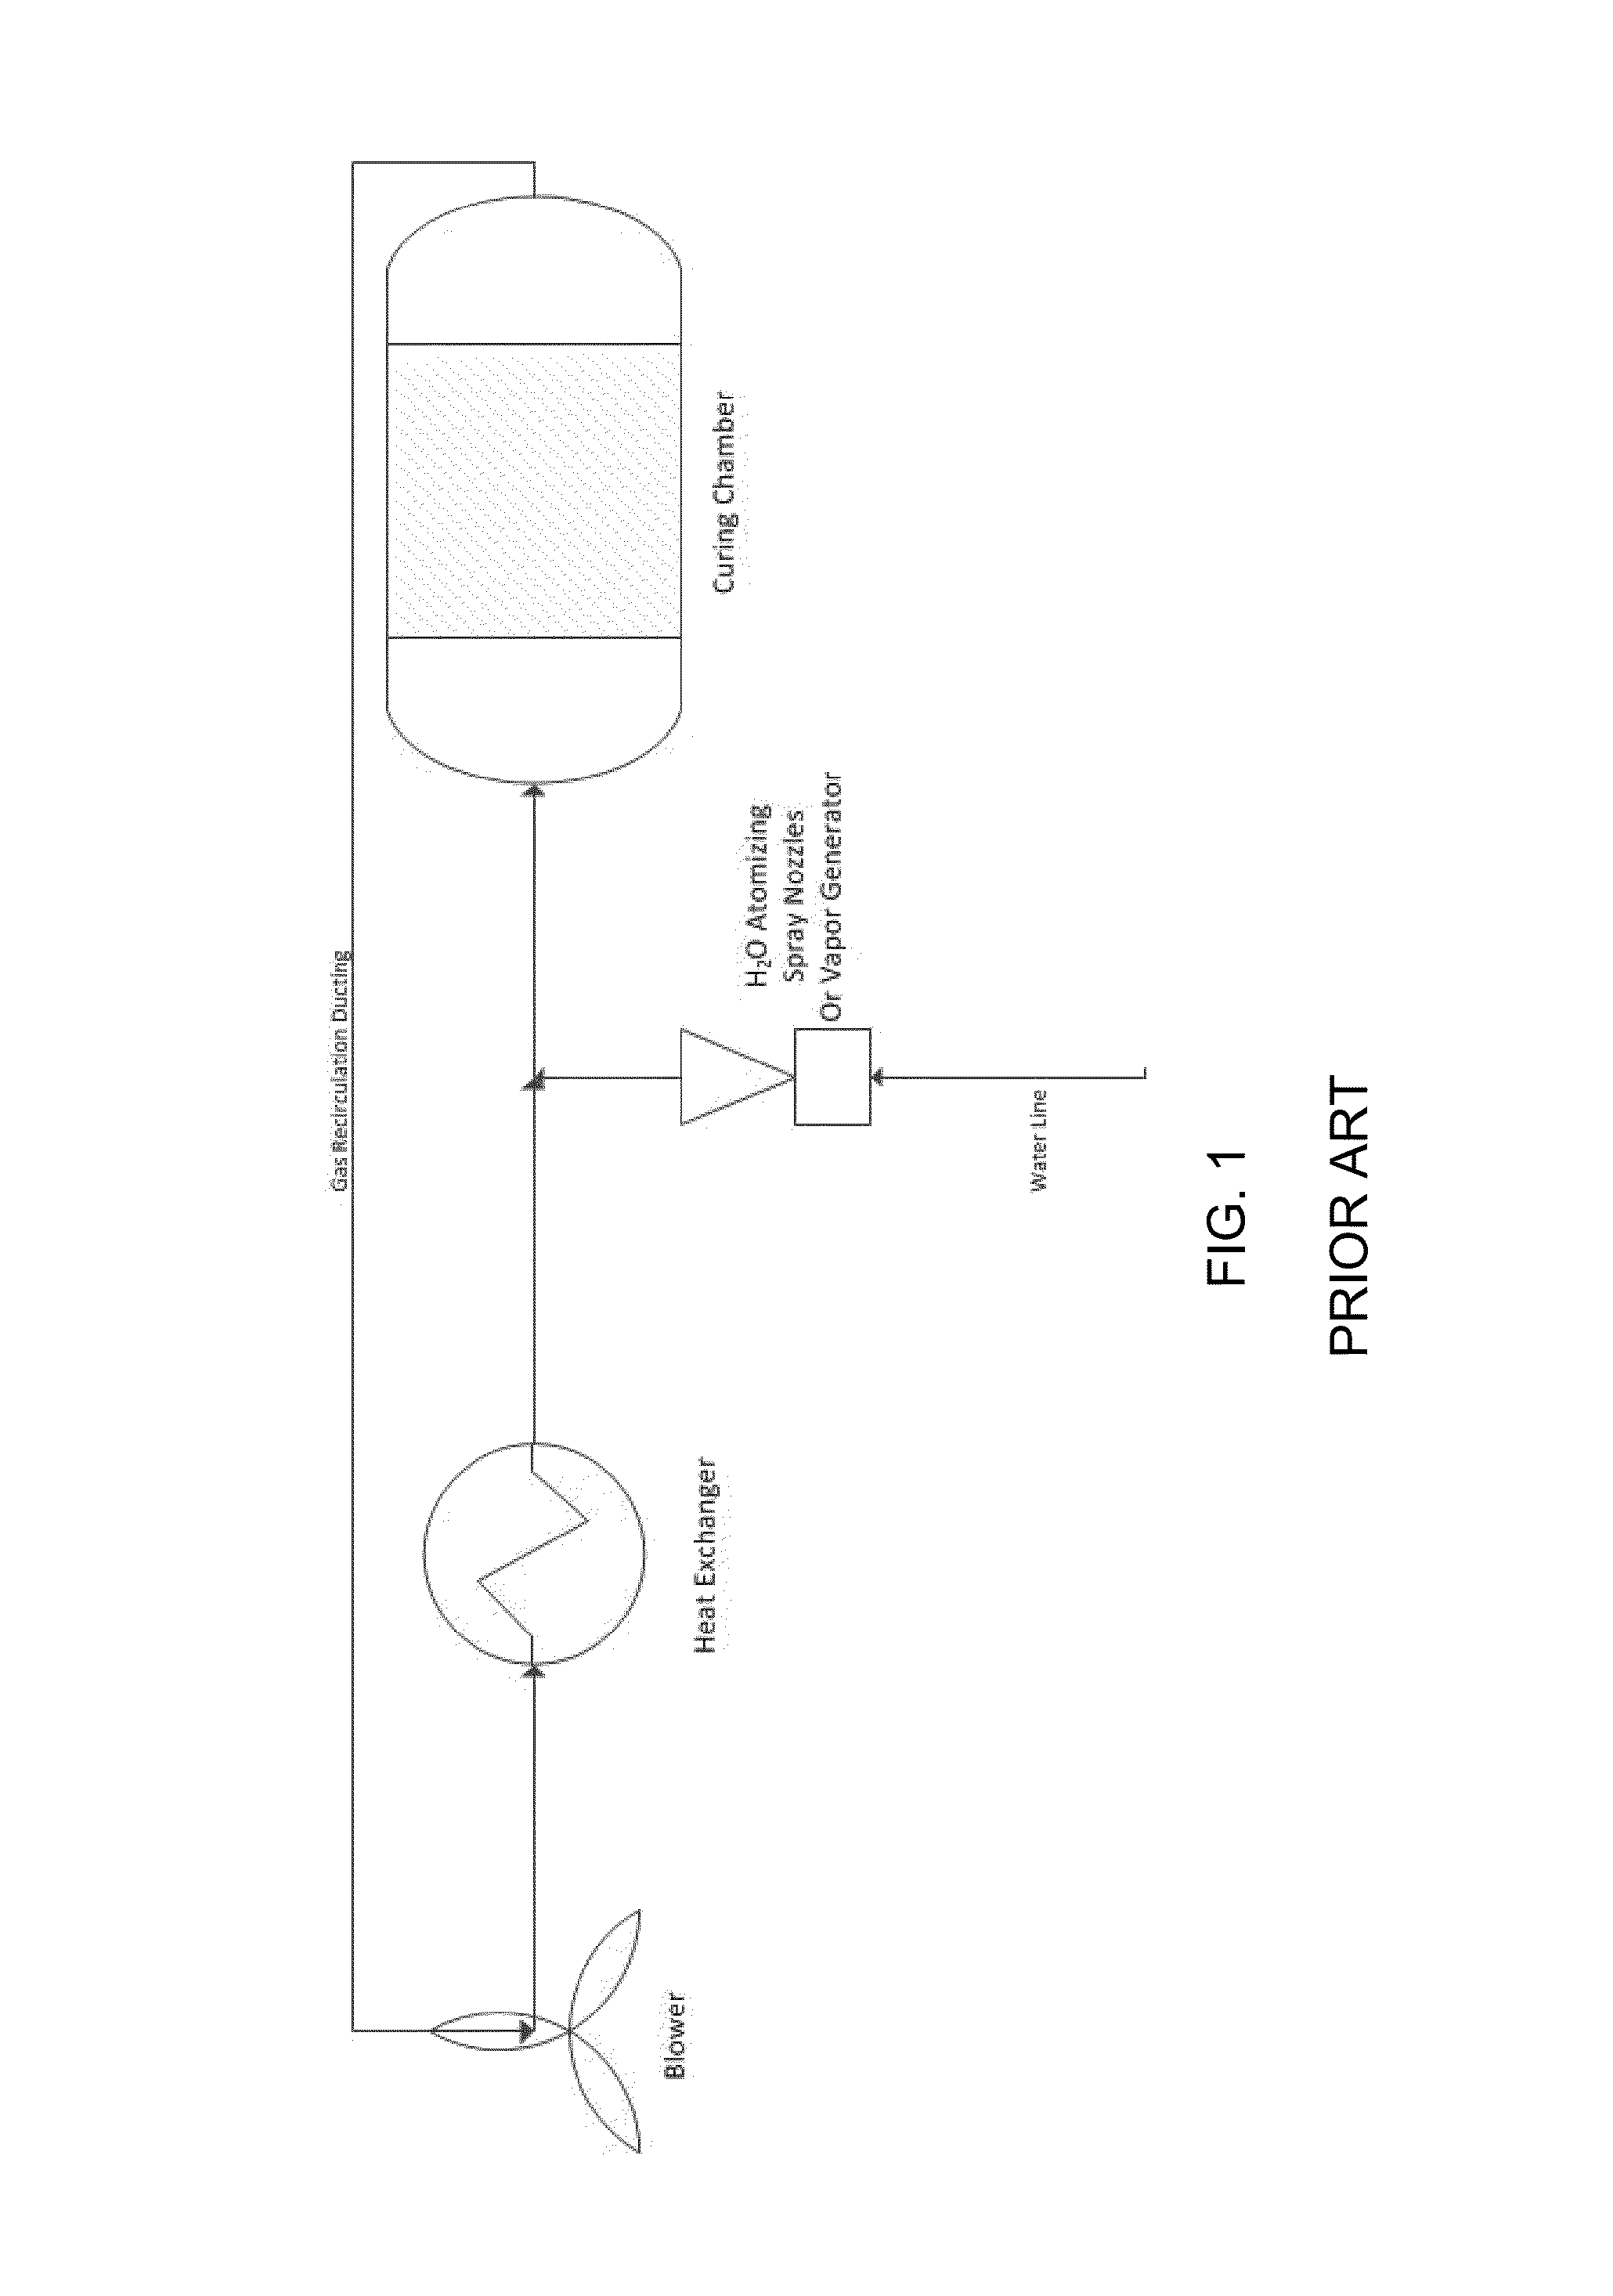 Curing systems for materials that consume carbon dioxide and method of use thereof